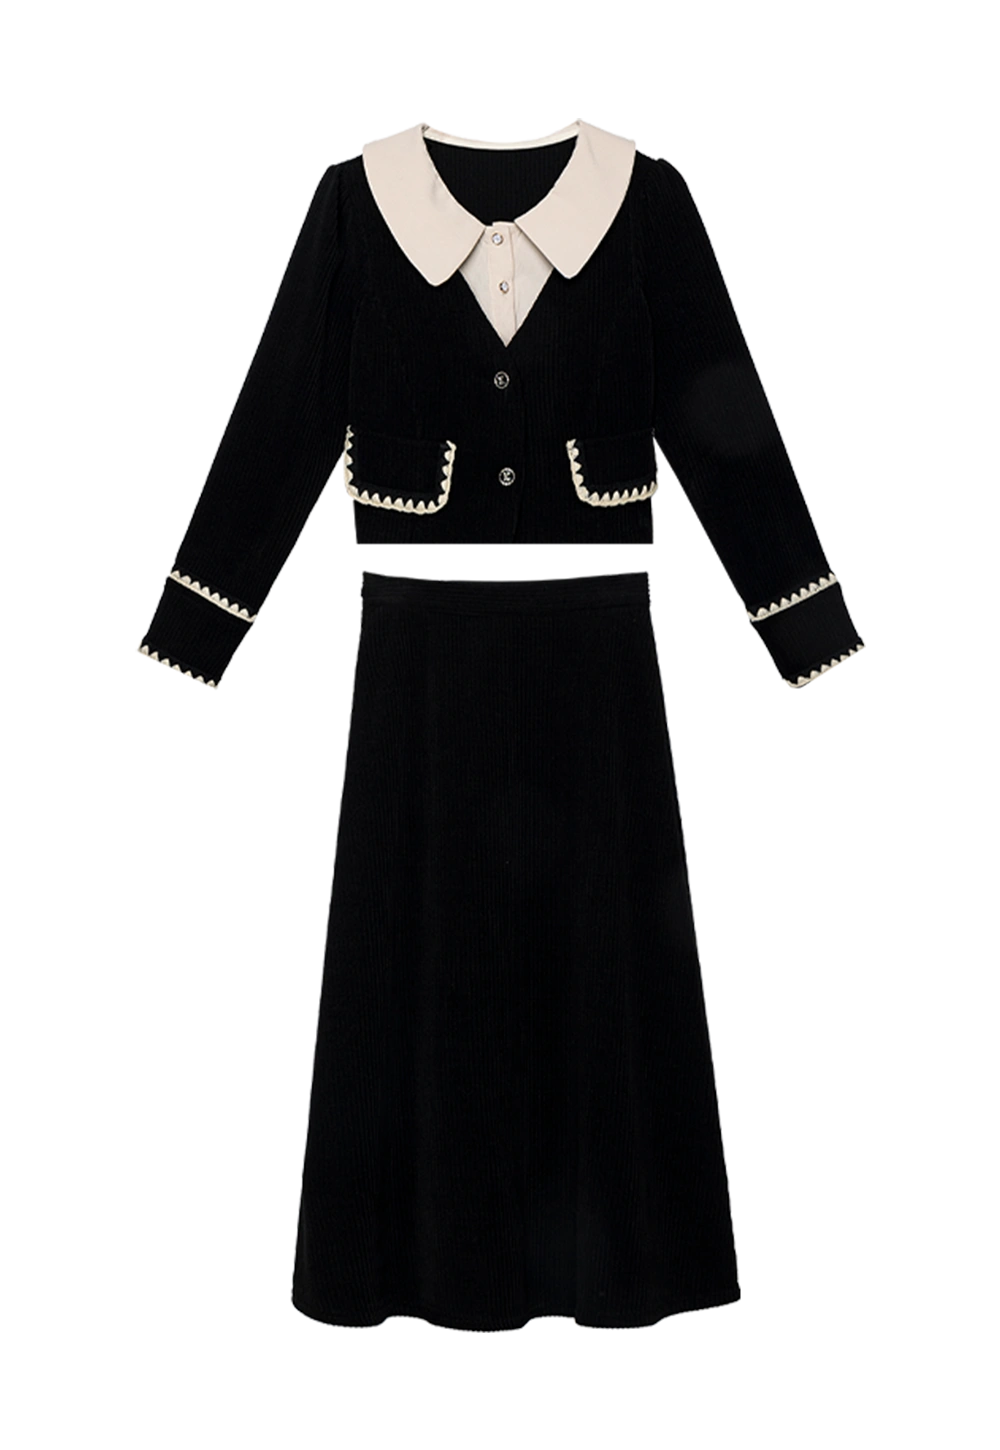 Women's Two-Piece Set: Black Long Sleeve Top with White Collar and Trim, and A-Line Skirt